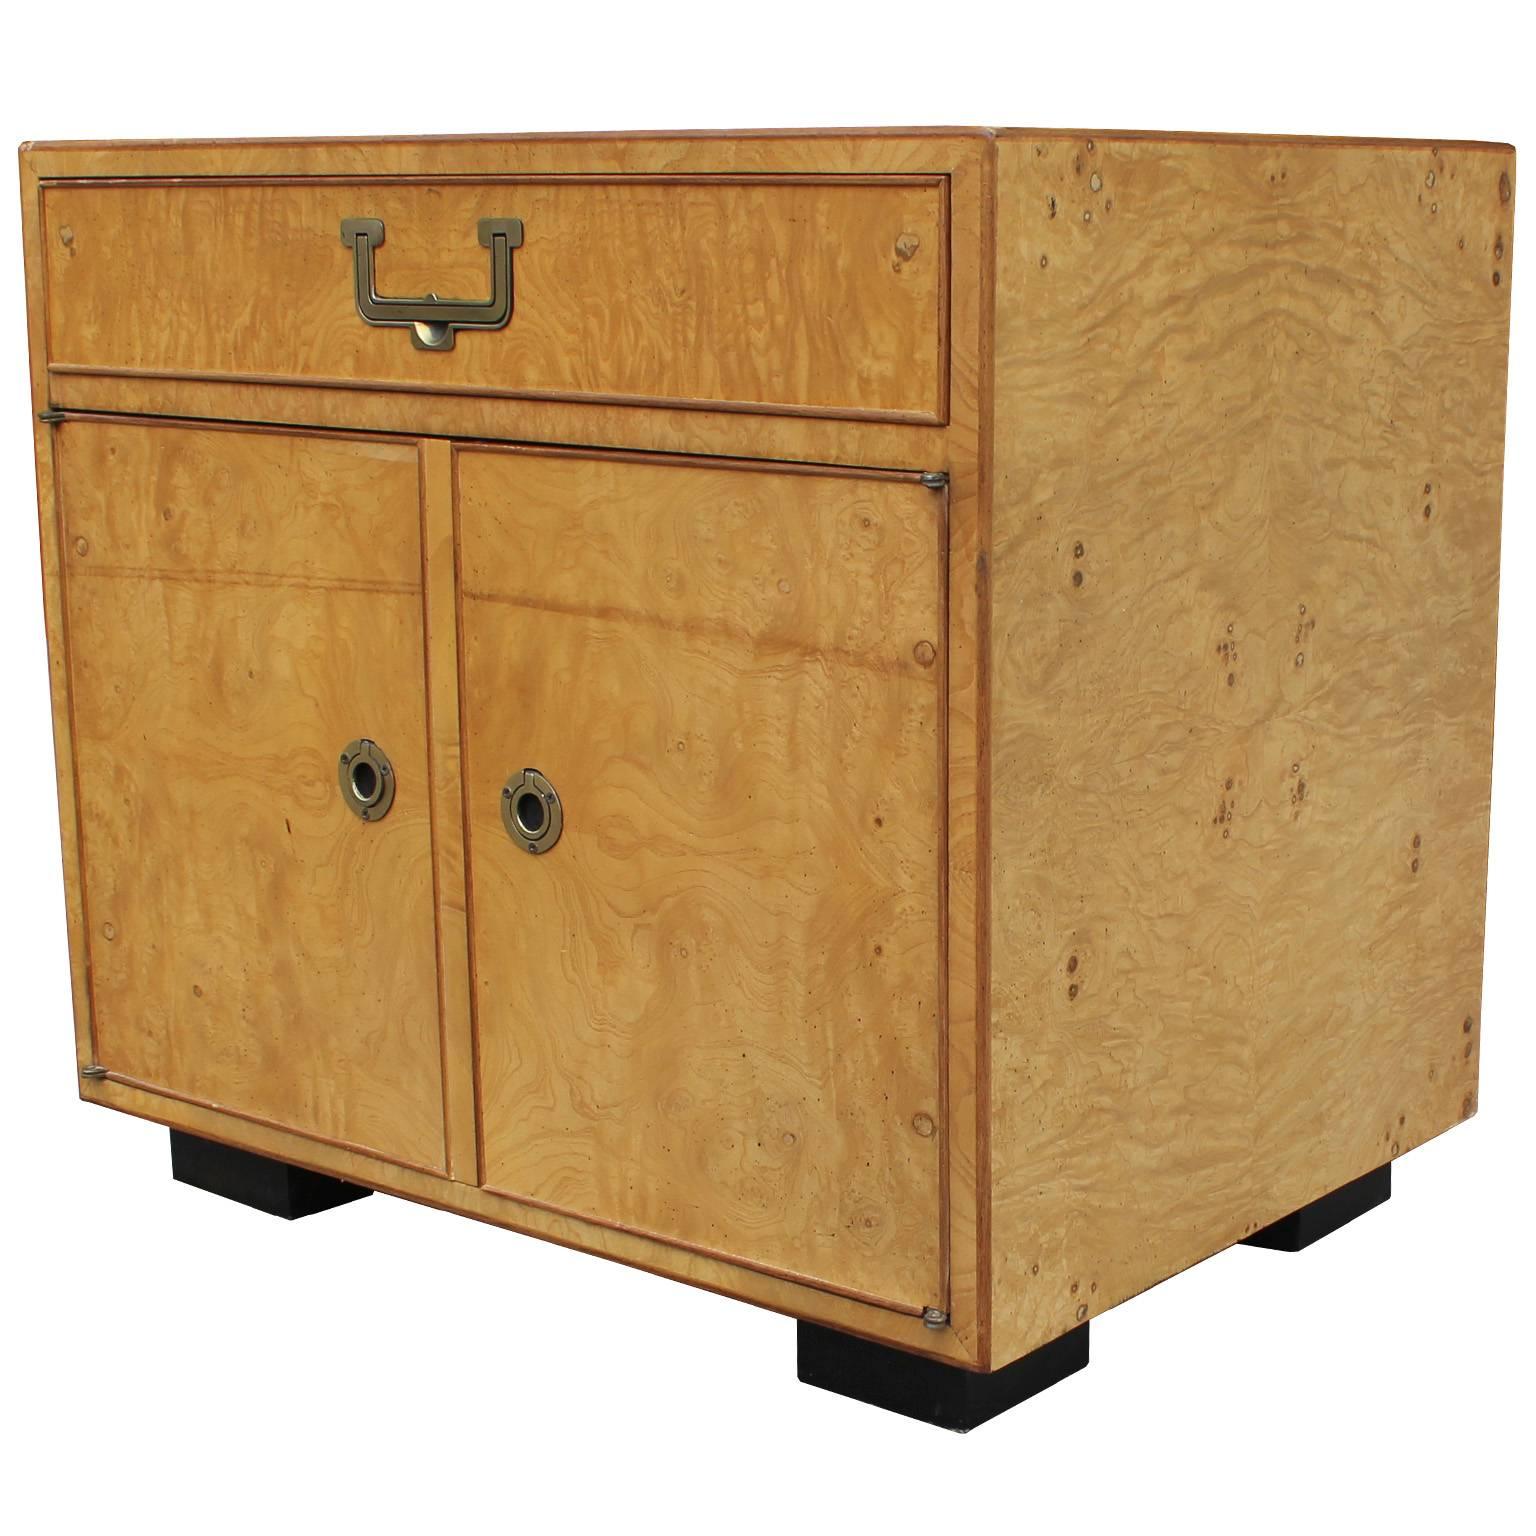 Glamorous pair of nightstands by Widdicomb. Blonde burl wood has excellent graining. Brass Campaign style hardware finishes the pieces. Perfect in a Mid-Century or Hollywood Regency style interior.